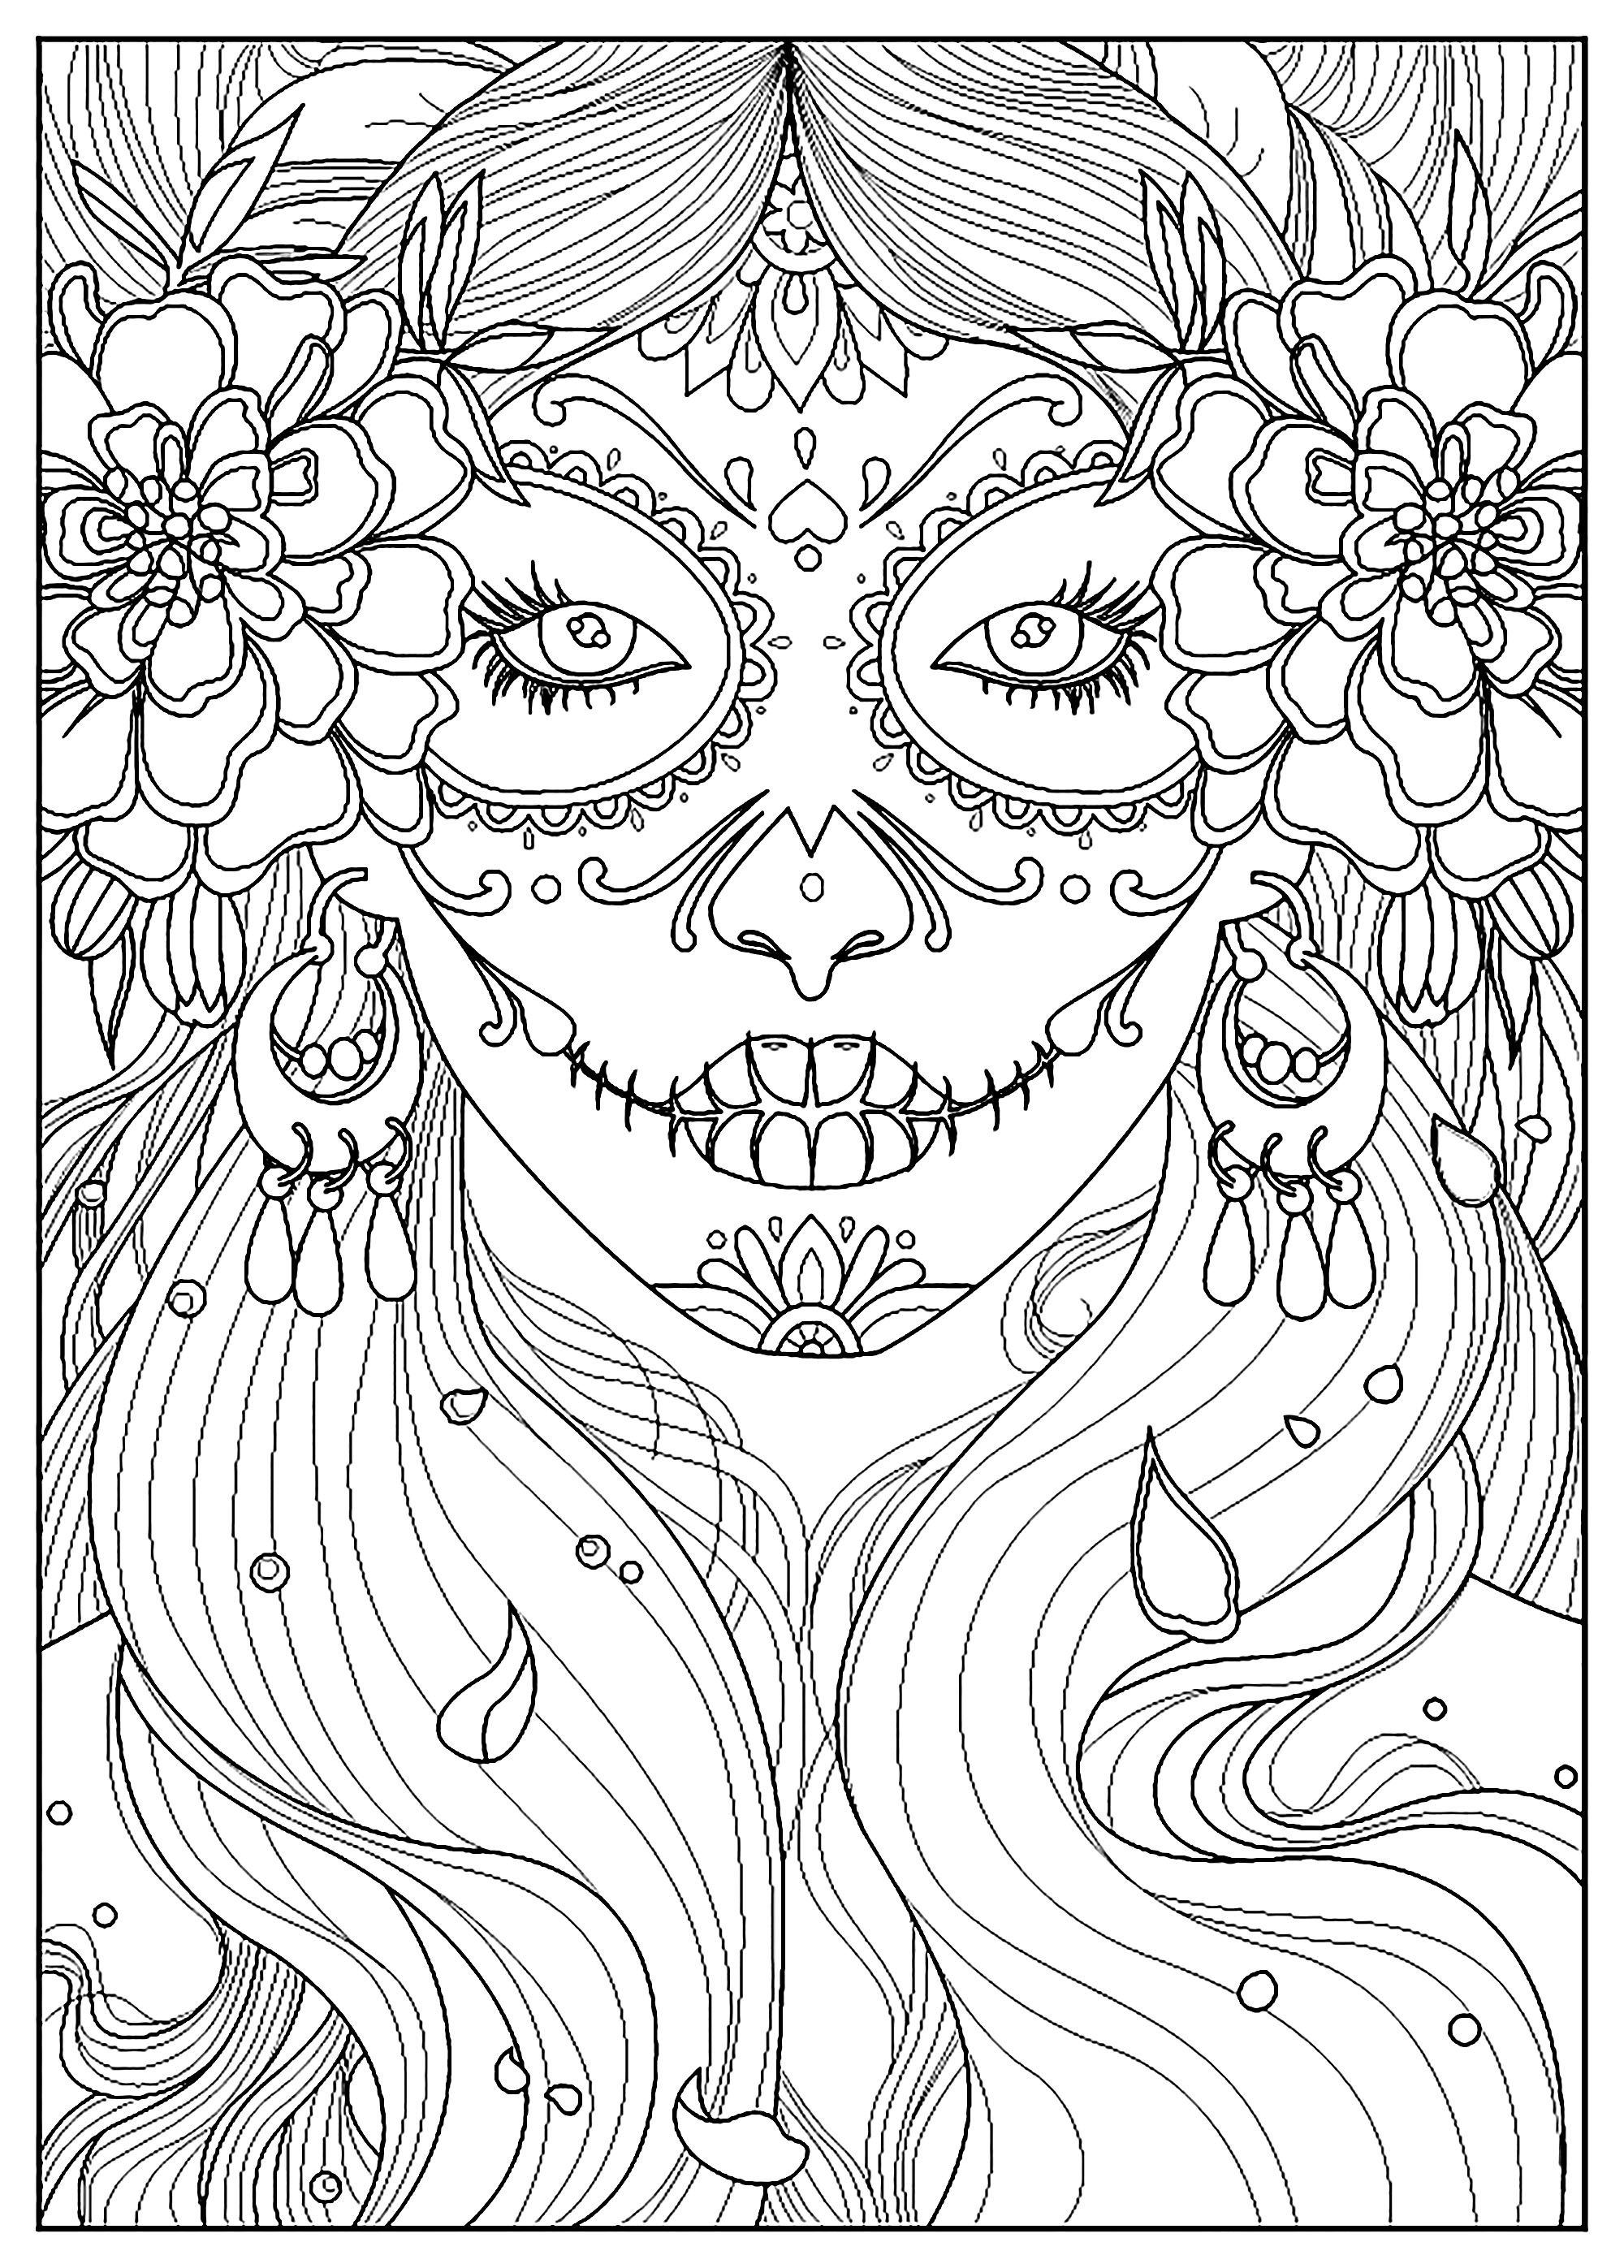 Download Woman - Coloring Pages for Adults - Page 3